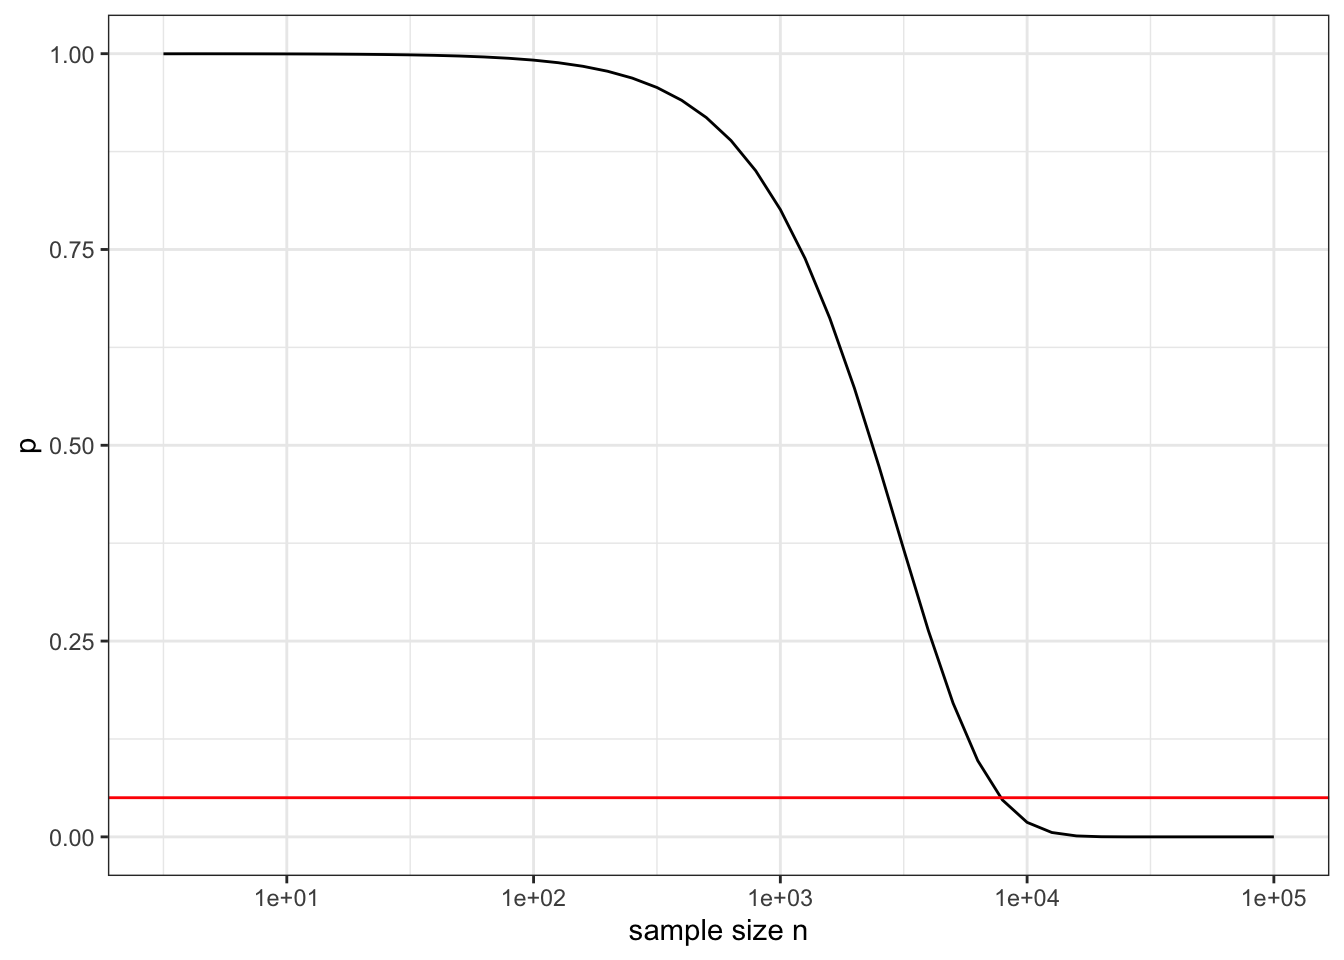 The p-value as a function of sample size n when the test statistic R-squared has the trivial value 0.001. The horizontal line shows the usual threshold for “significance” of p < 0.05.